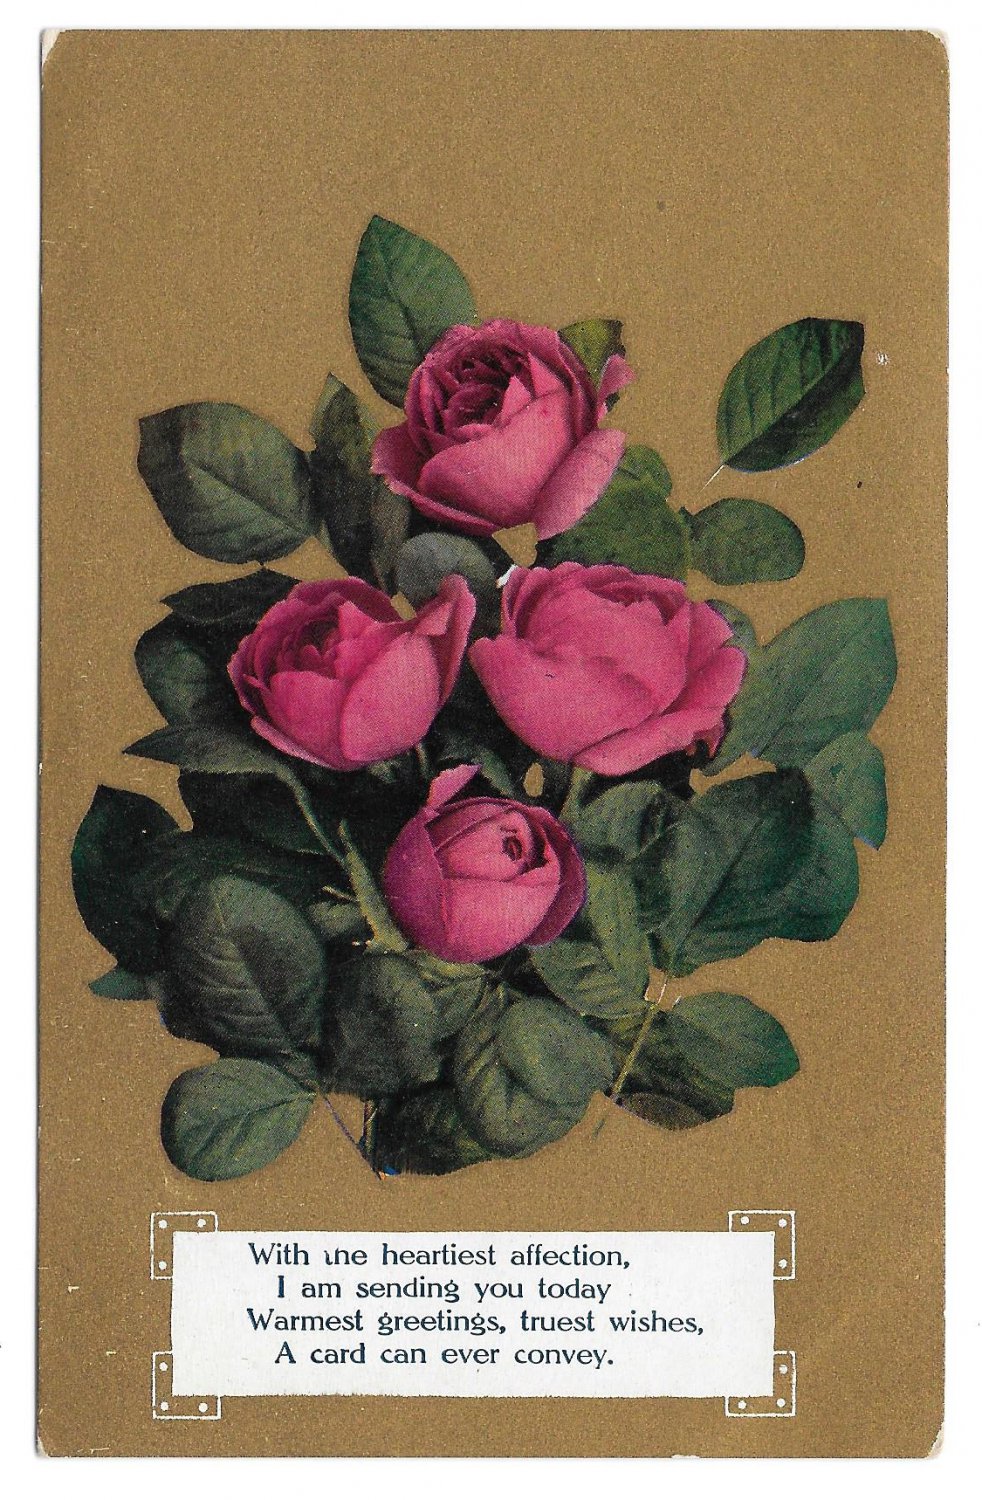 Vintage Motto Postcard Flowers on Gold Background Red Roses With Heartiest Affection